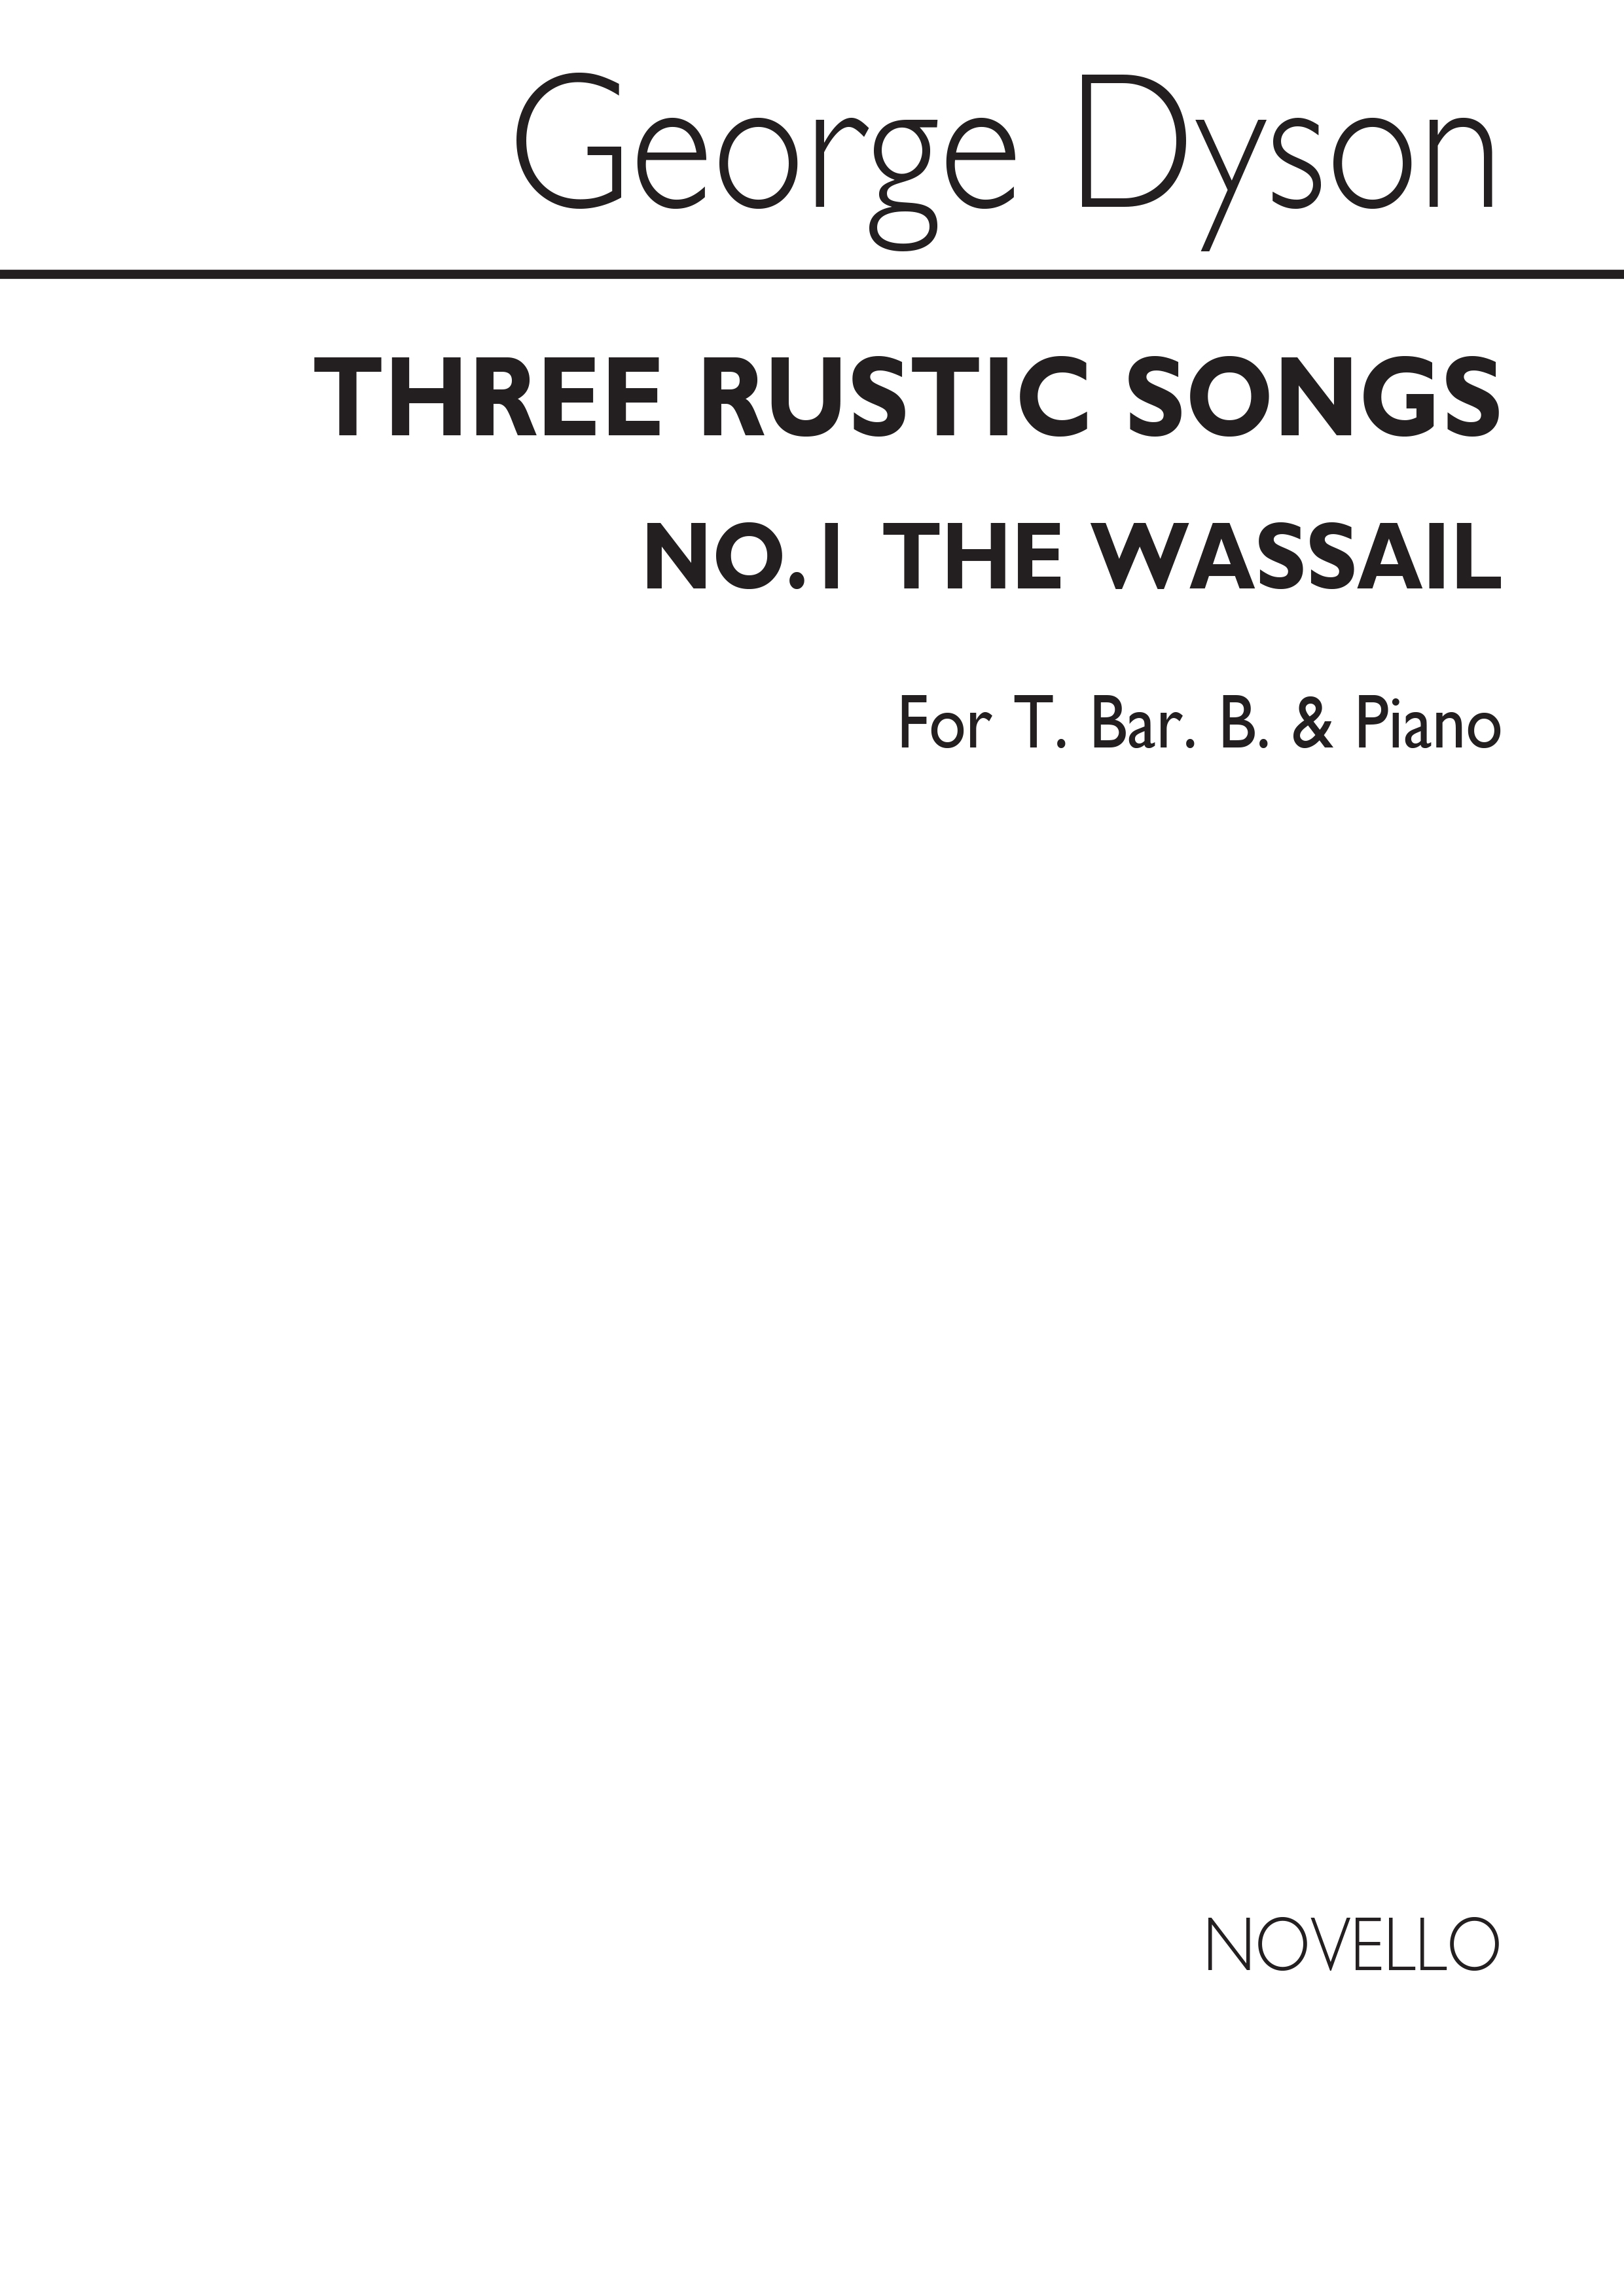 Dyson The Wassail T/Bar/B/Piano No 1 From Three Rustic Songs